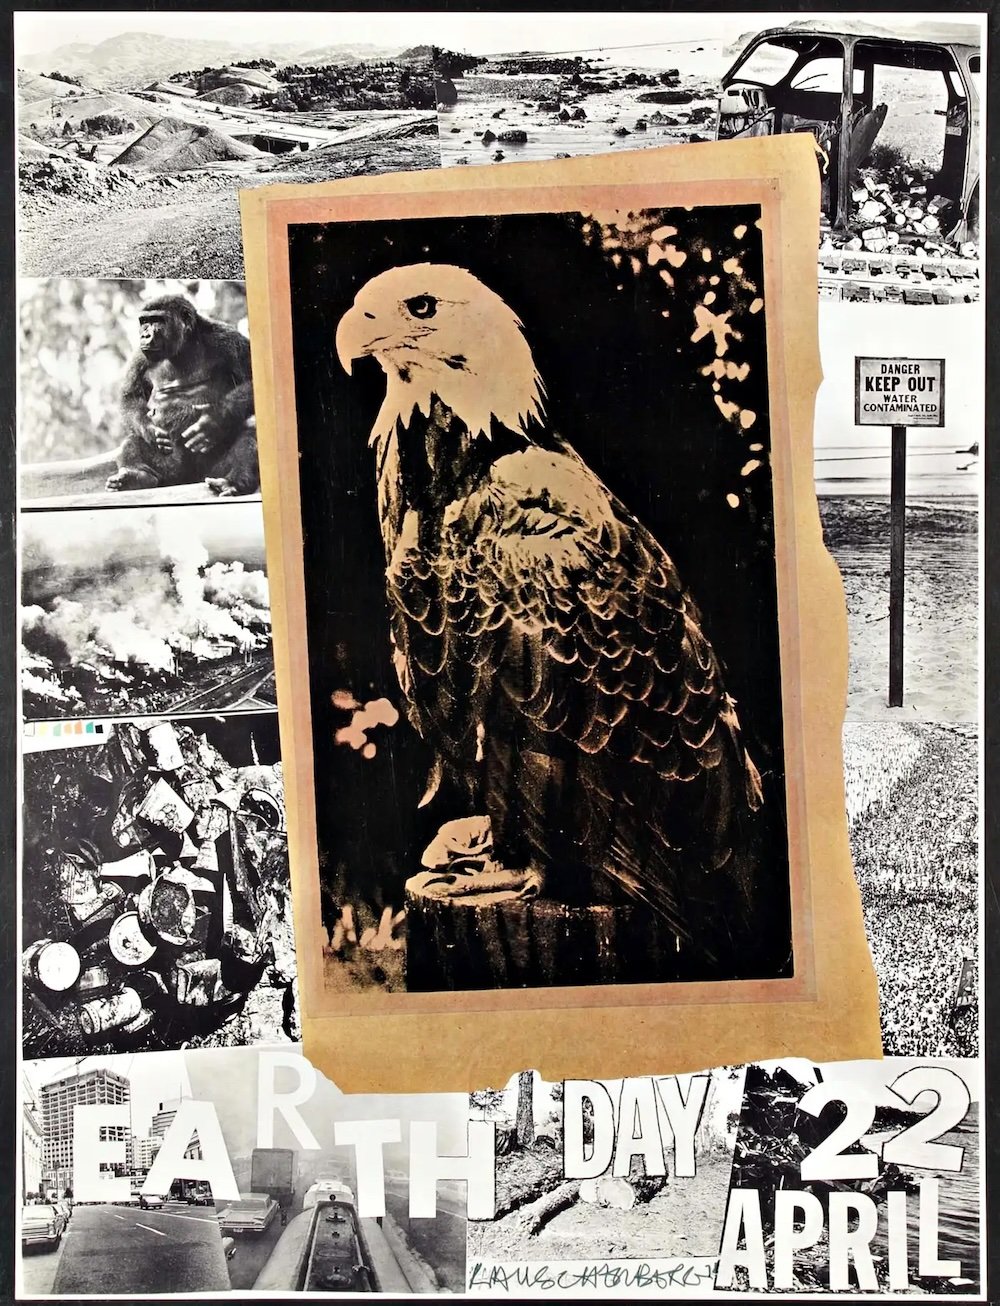  Artist,  Robert Rauschenberg , designed this East Day poster in 1970. 